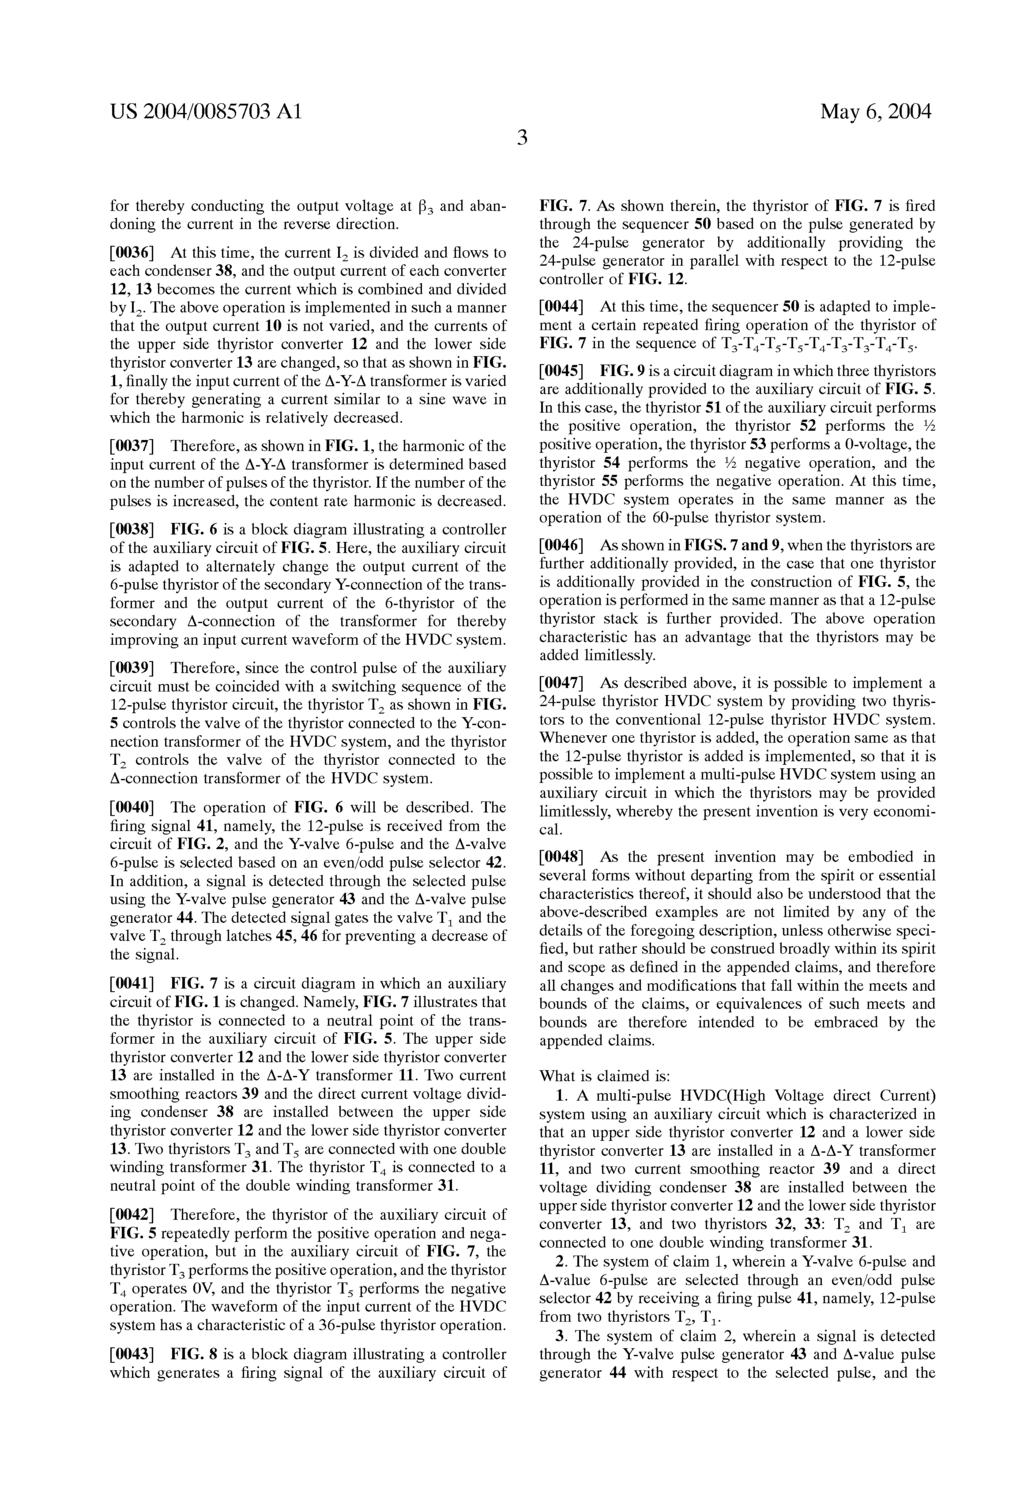 US 2004/0085703 A1 May 6, 2004 for thereby conducting the output Voltage at B and aban doning the current in the reverse direction. 0036.